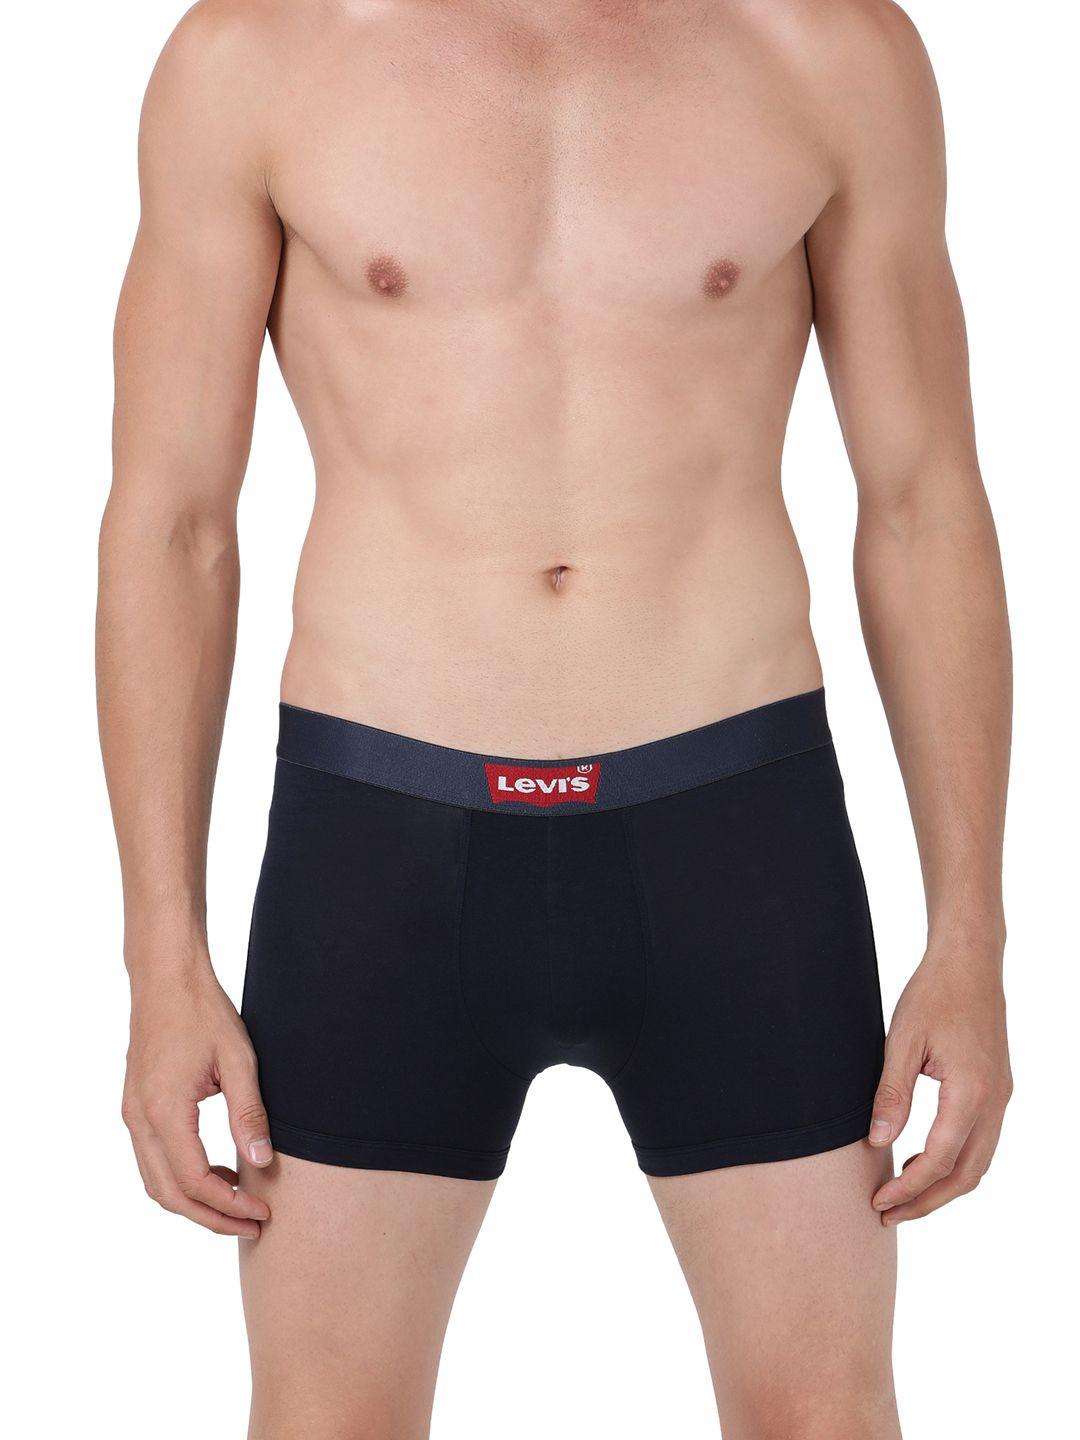 levis-men-navy-blue-solid-antimicrobial-trunks-#032-trunk